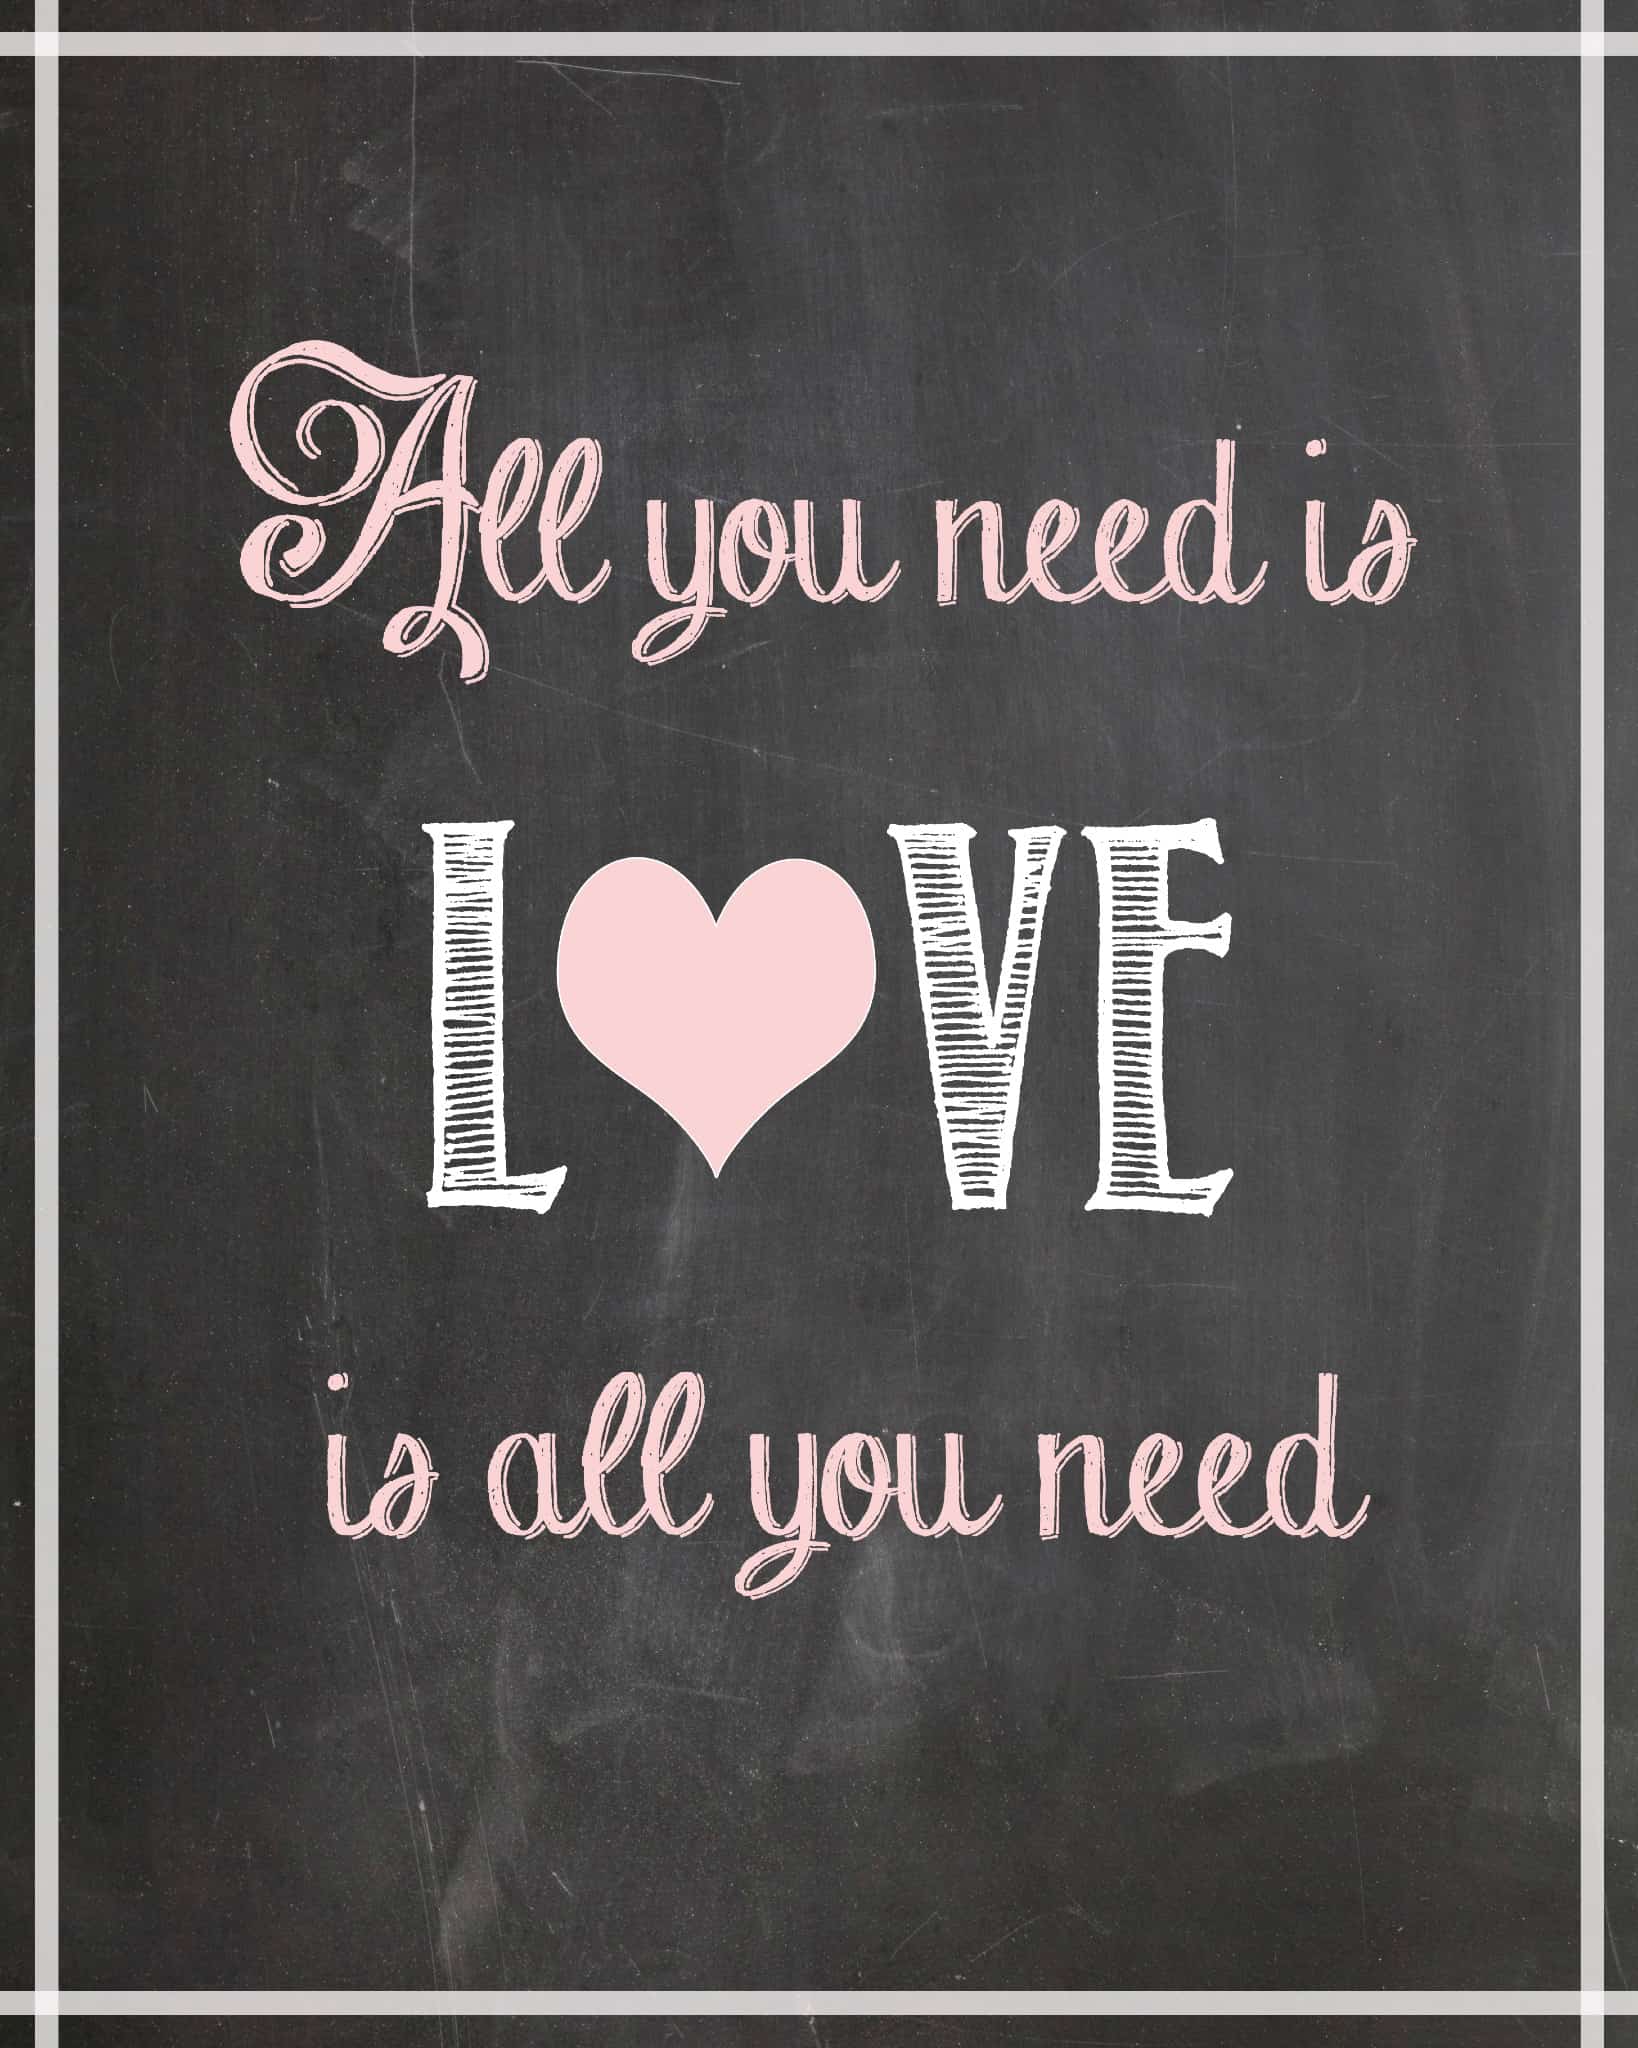 All You Need is Love” FREE Printable - Cupcake Diaries